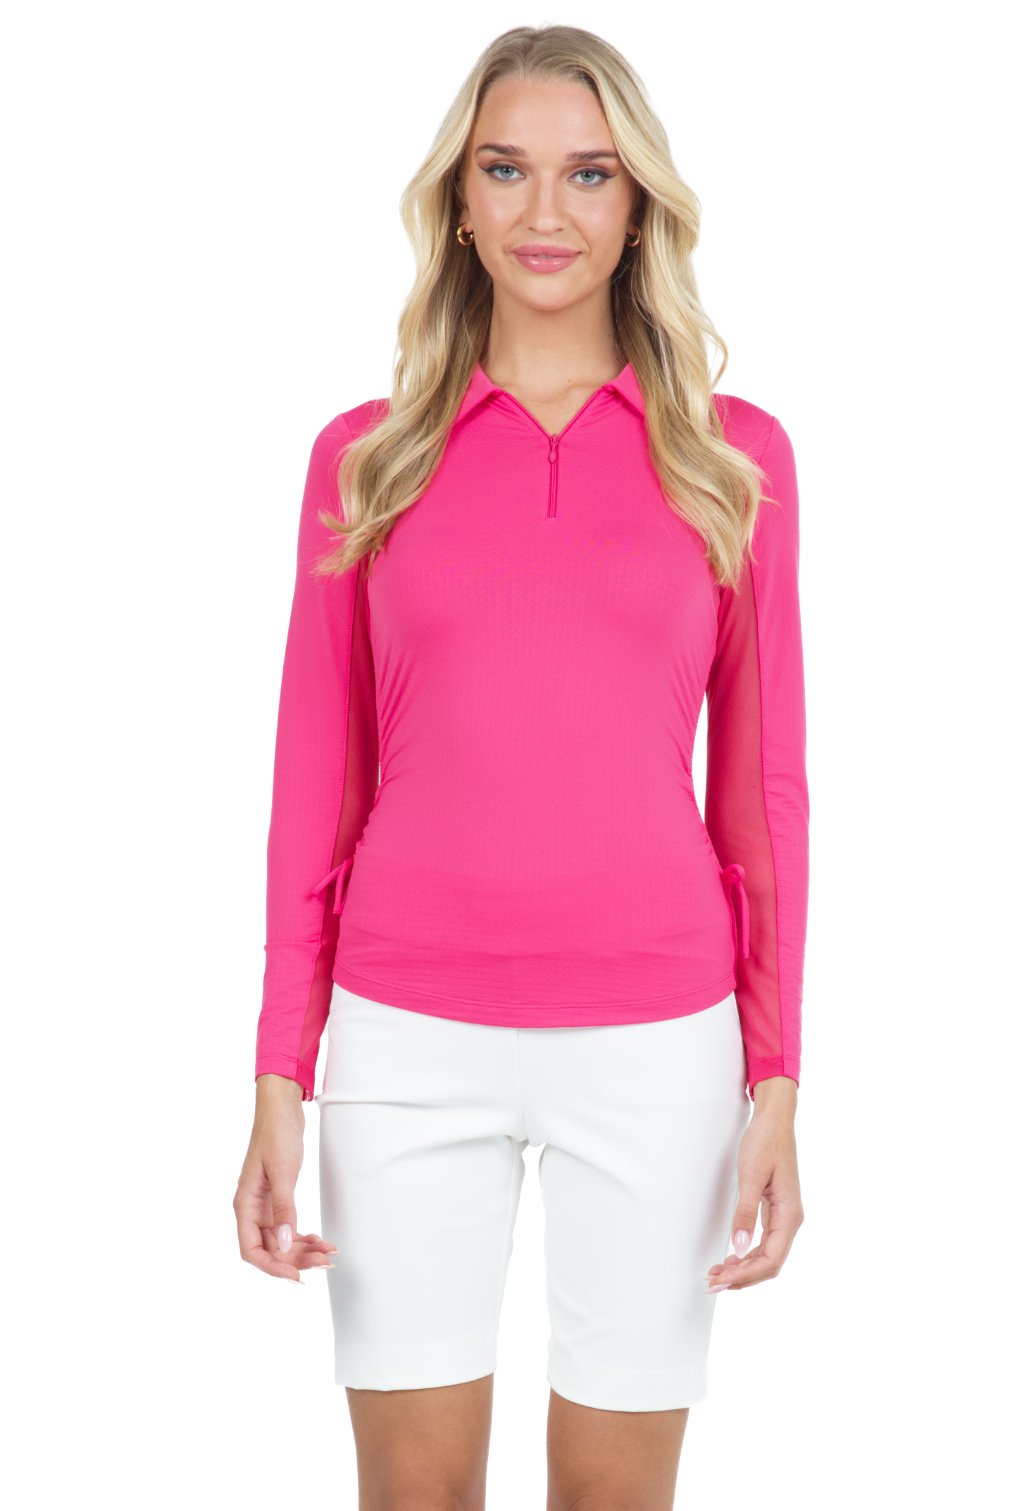 Adjustable Long Sleeve Zip Polo - Molly's! A Chic and Unique Boutique 